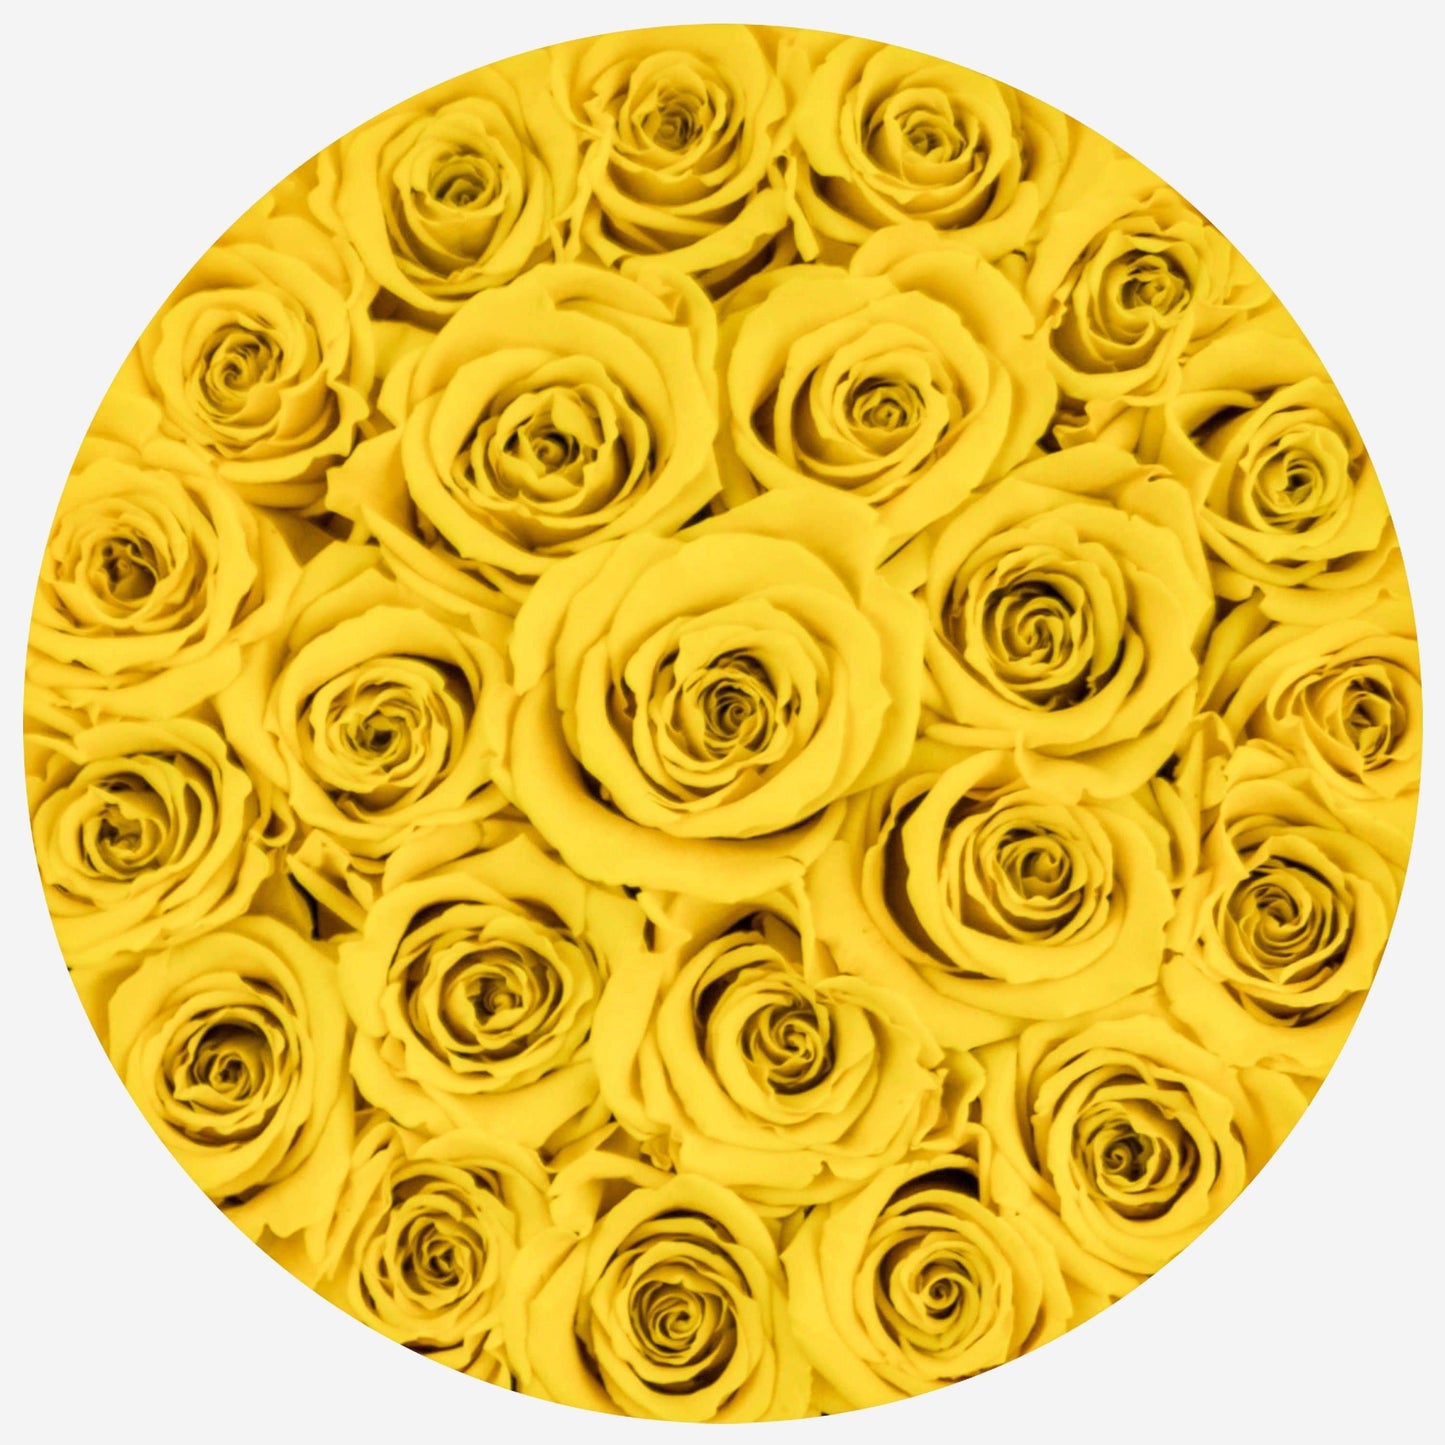 Classic White Box | Yellow Roses - The Million Roses